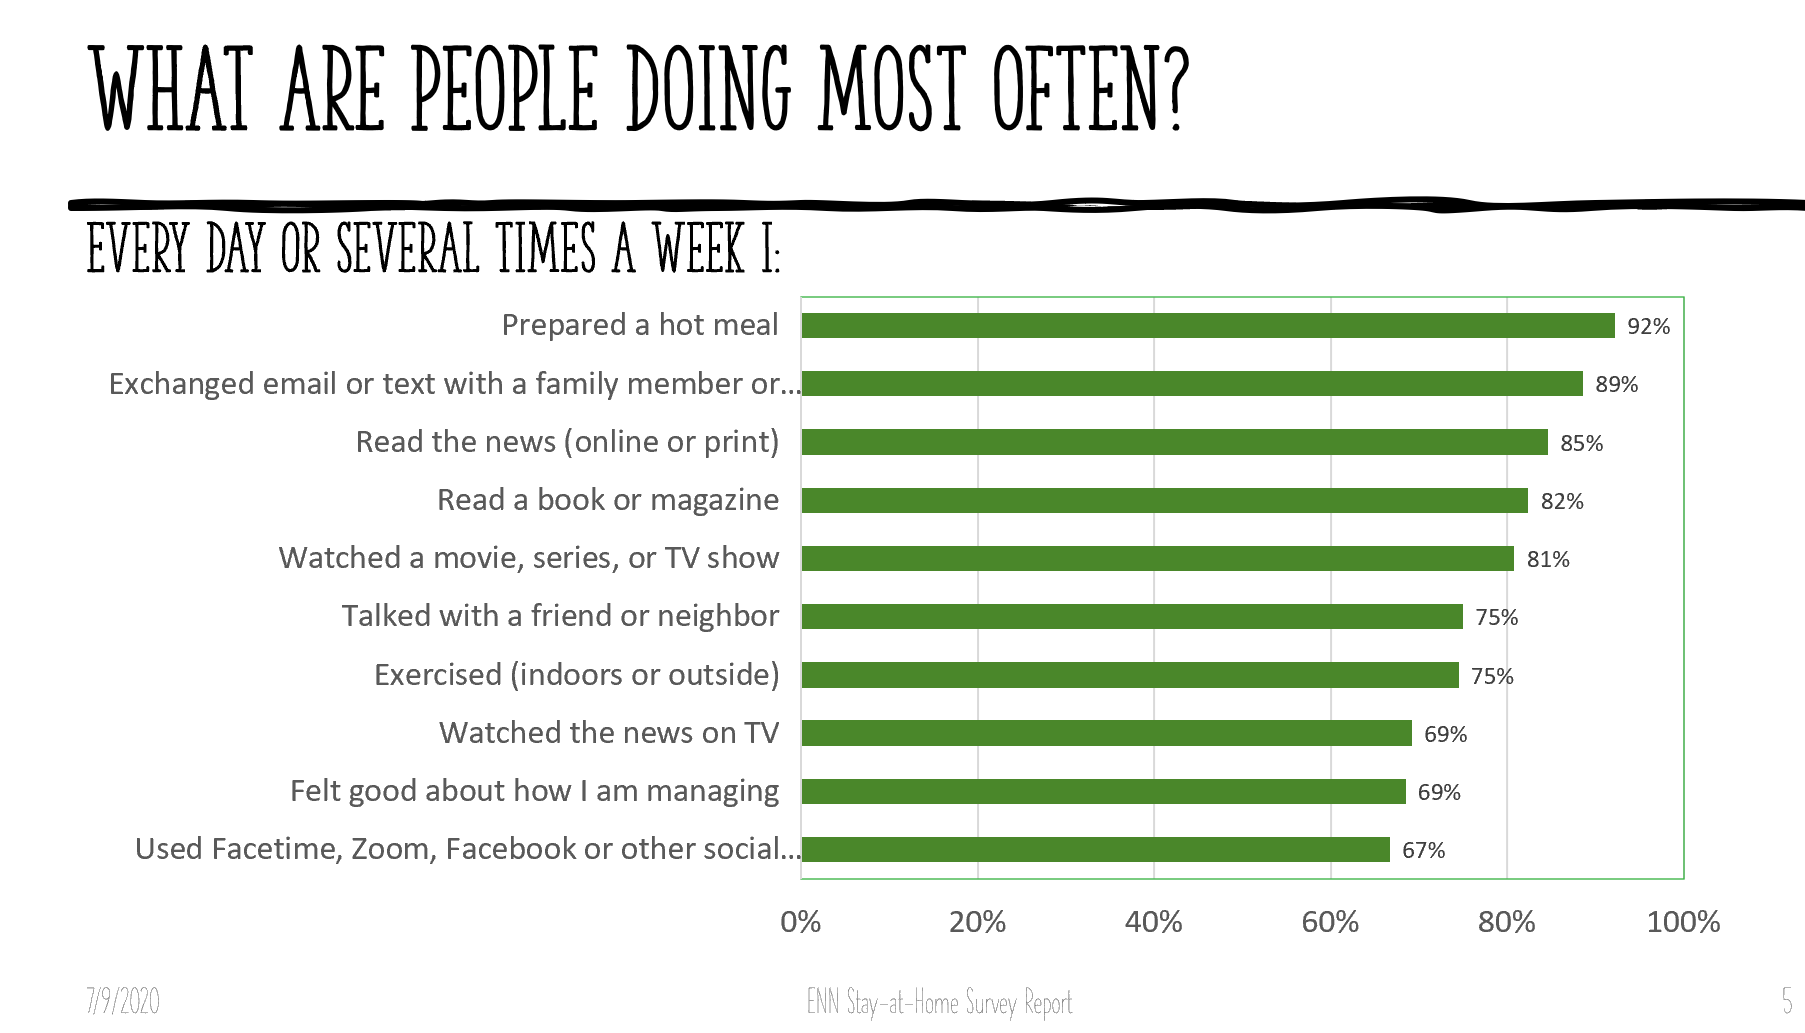 What are people doing most often?